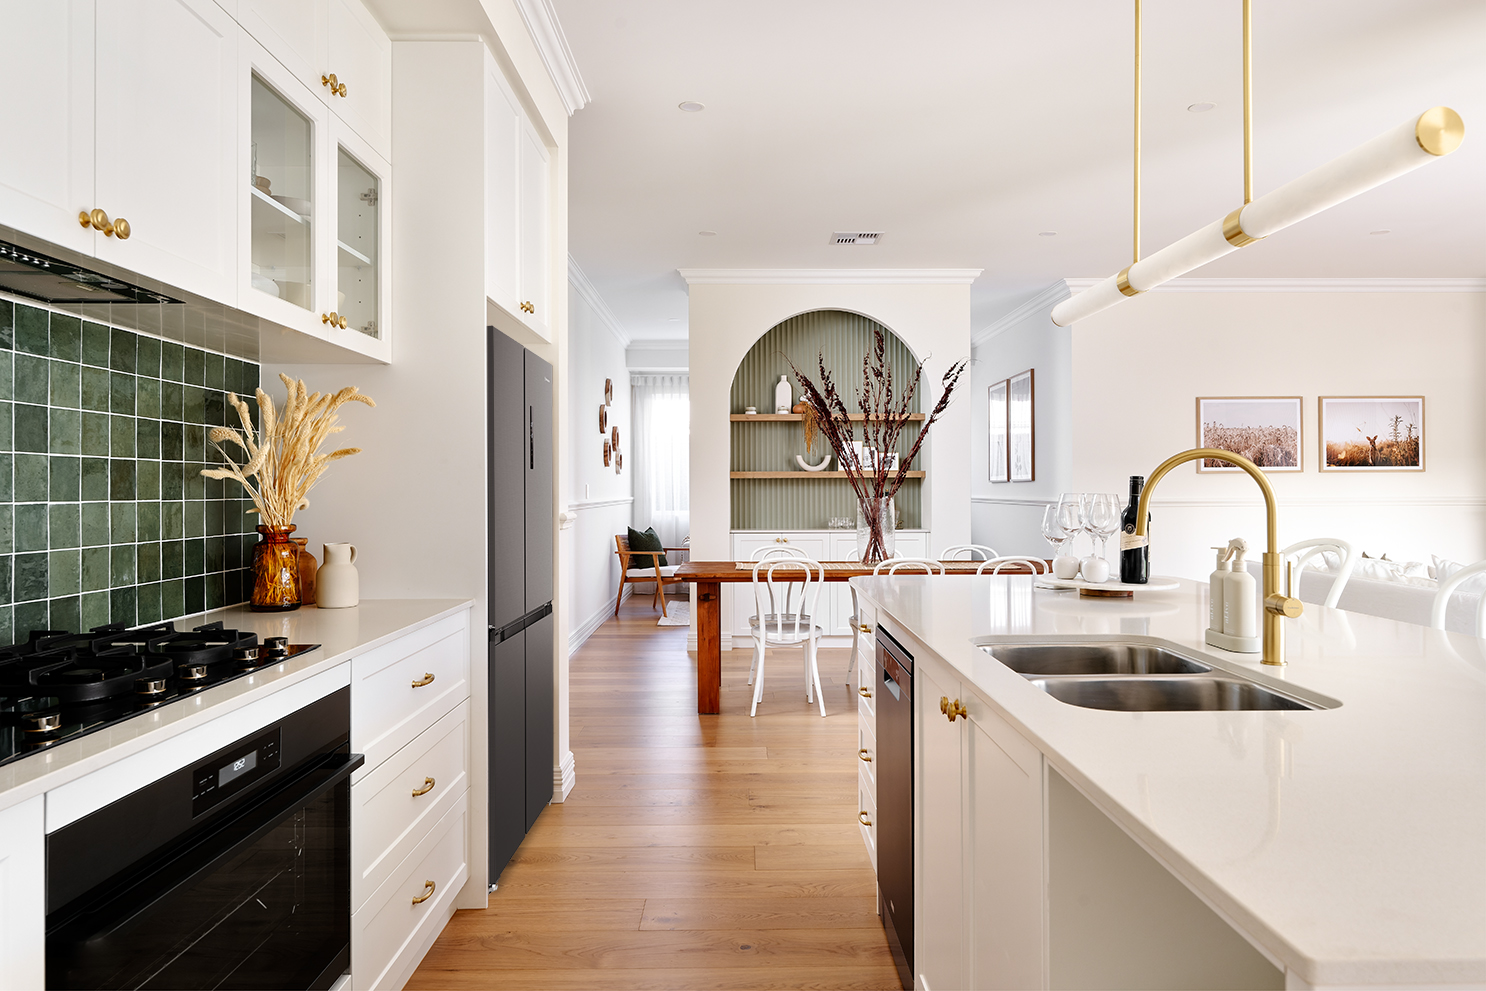 Plunkett Homes Display Home The Kingstown in Bushmead kitchen and dining with arch